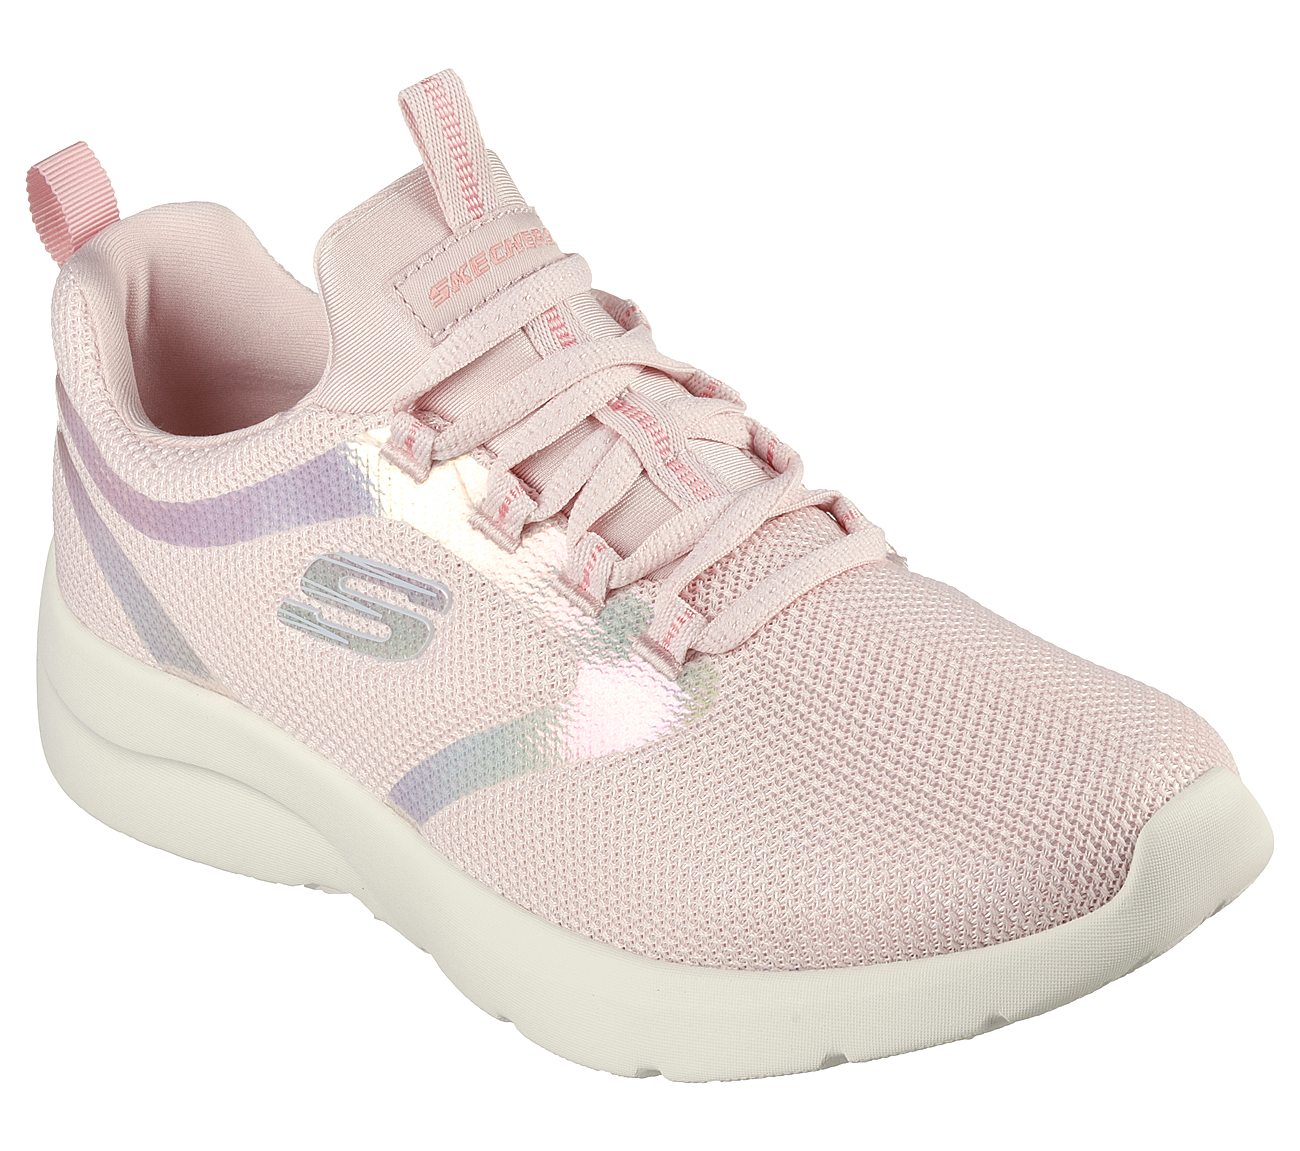 DYNAMIGHT 2, ROSE Footwear Right View